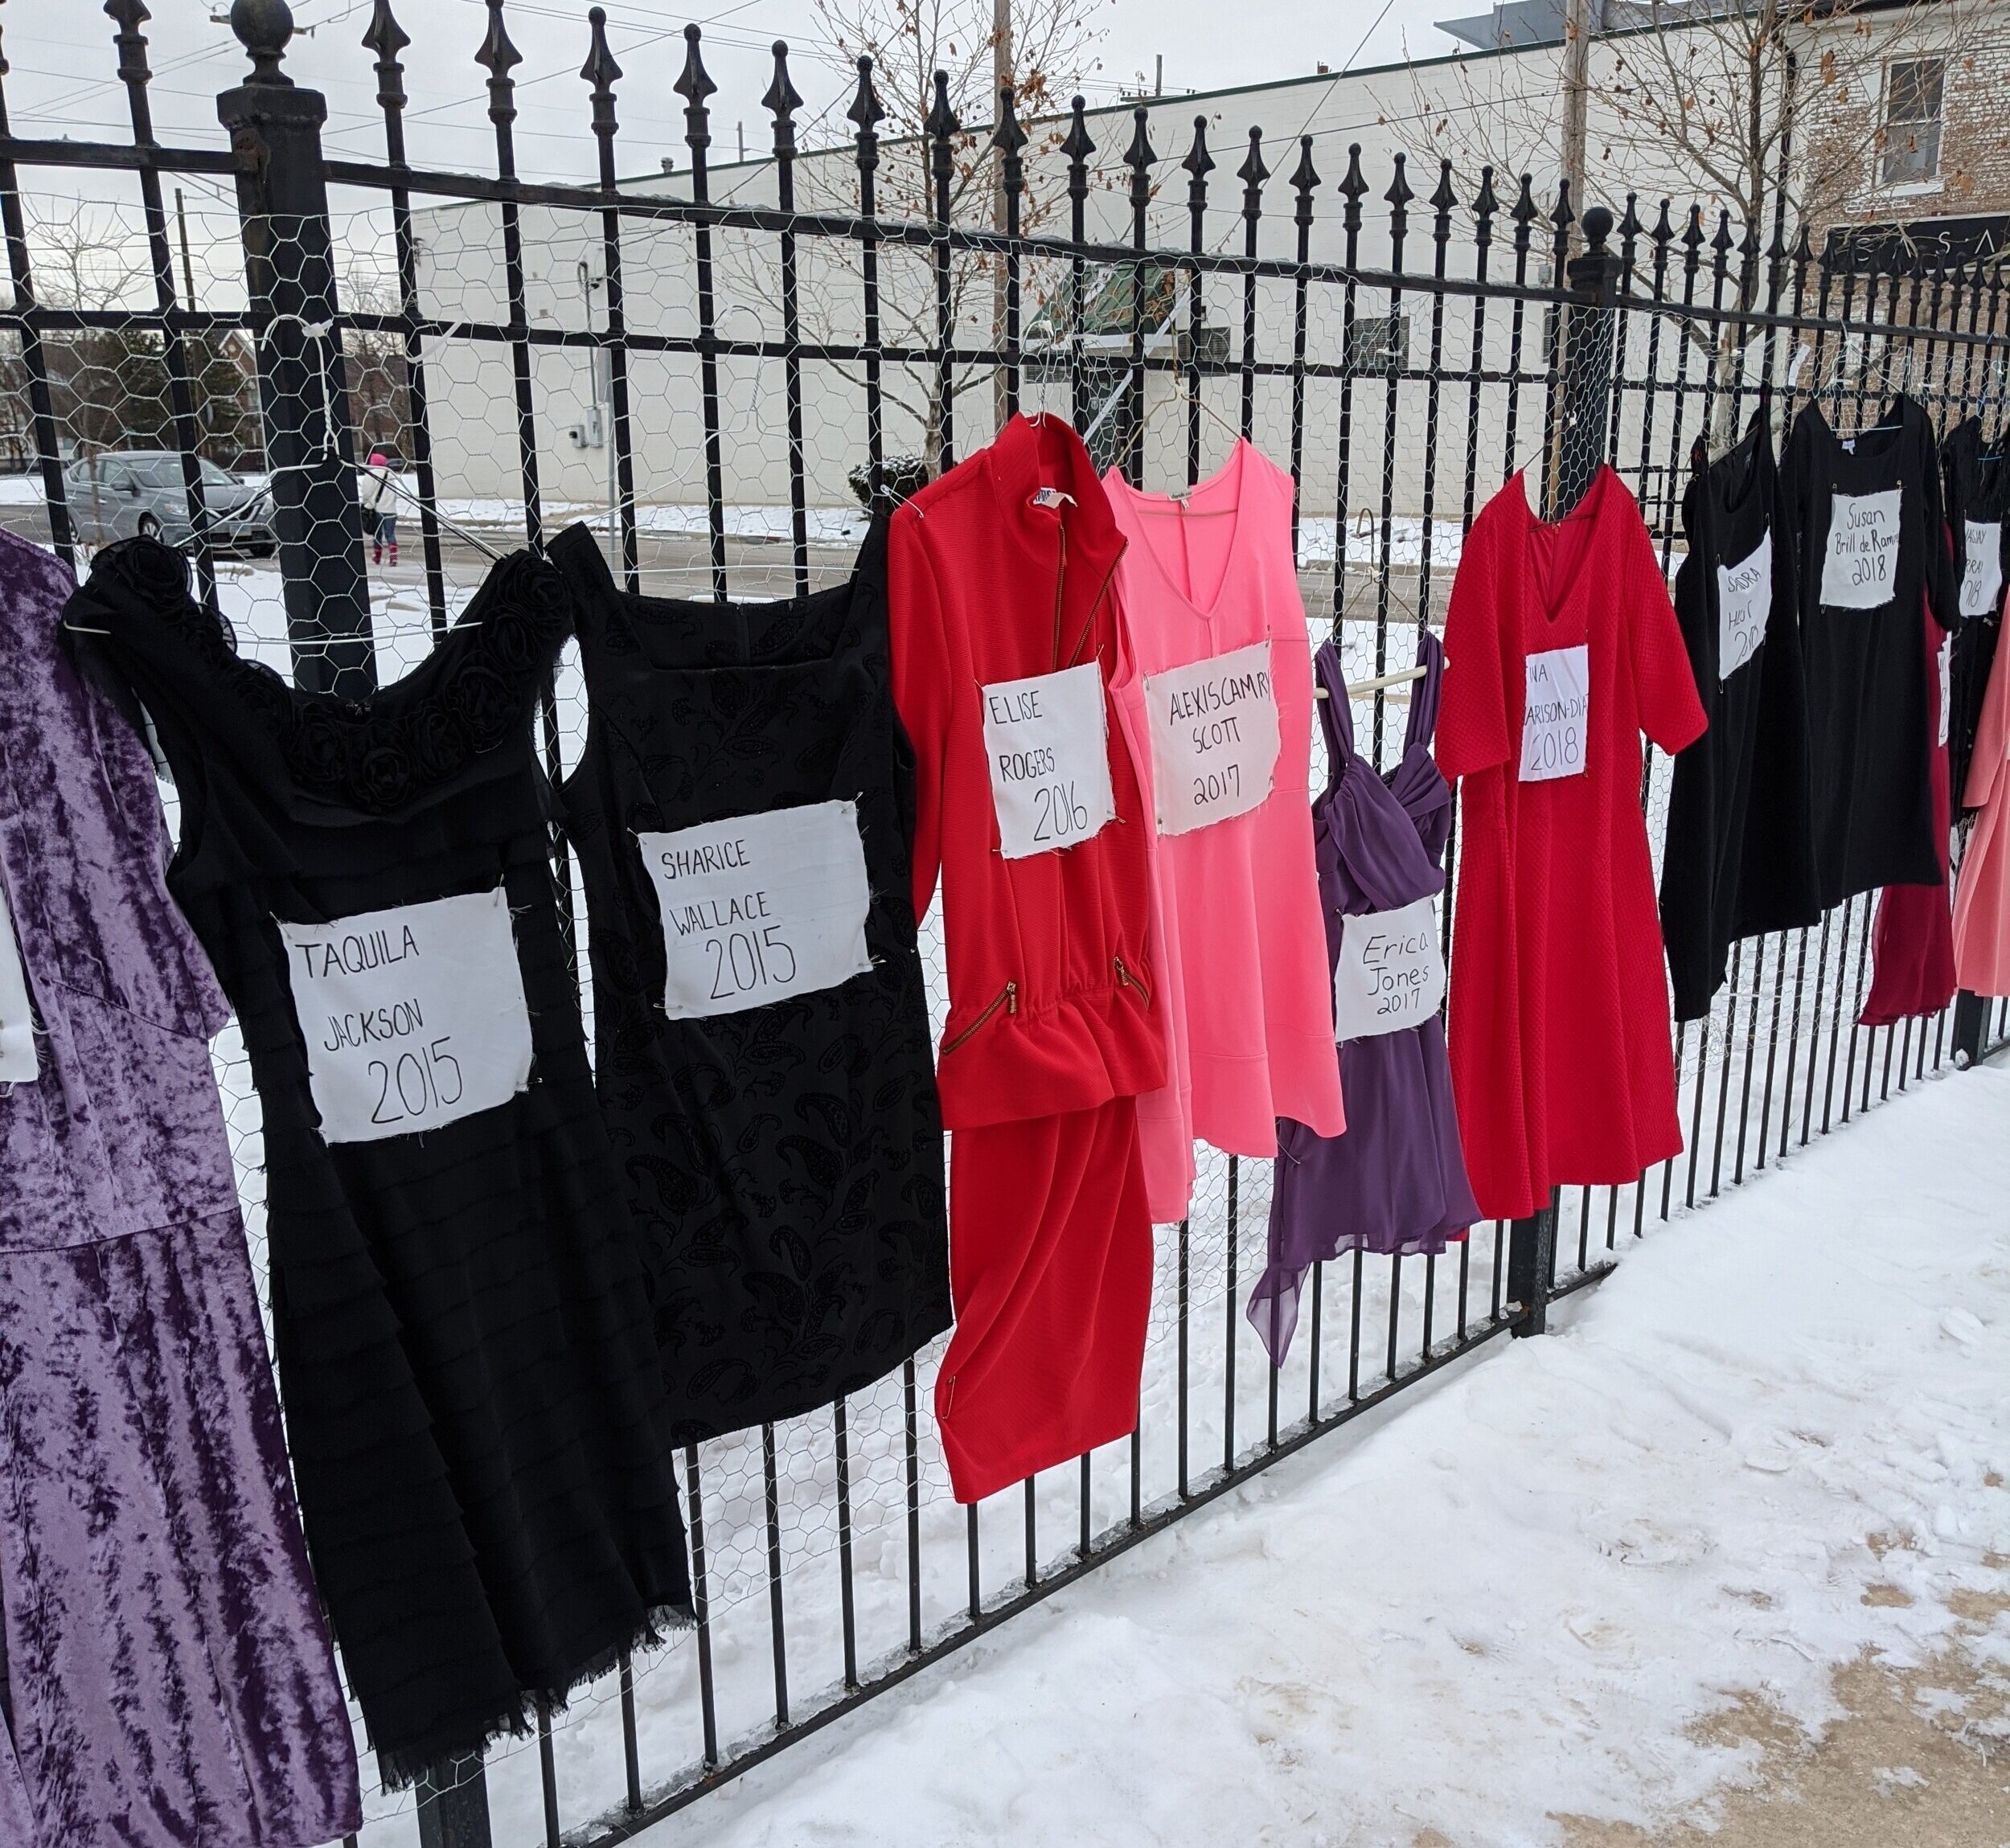   Remember Her, Peoria!   Collaborative Public Installation honoring the missing and murdered women of Peoria from 1993-2019  Dresses, fabric, fabric markers, hangers  2020   In collaboration with community leaders and activists:    Susan O’Neal    N